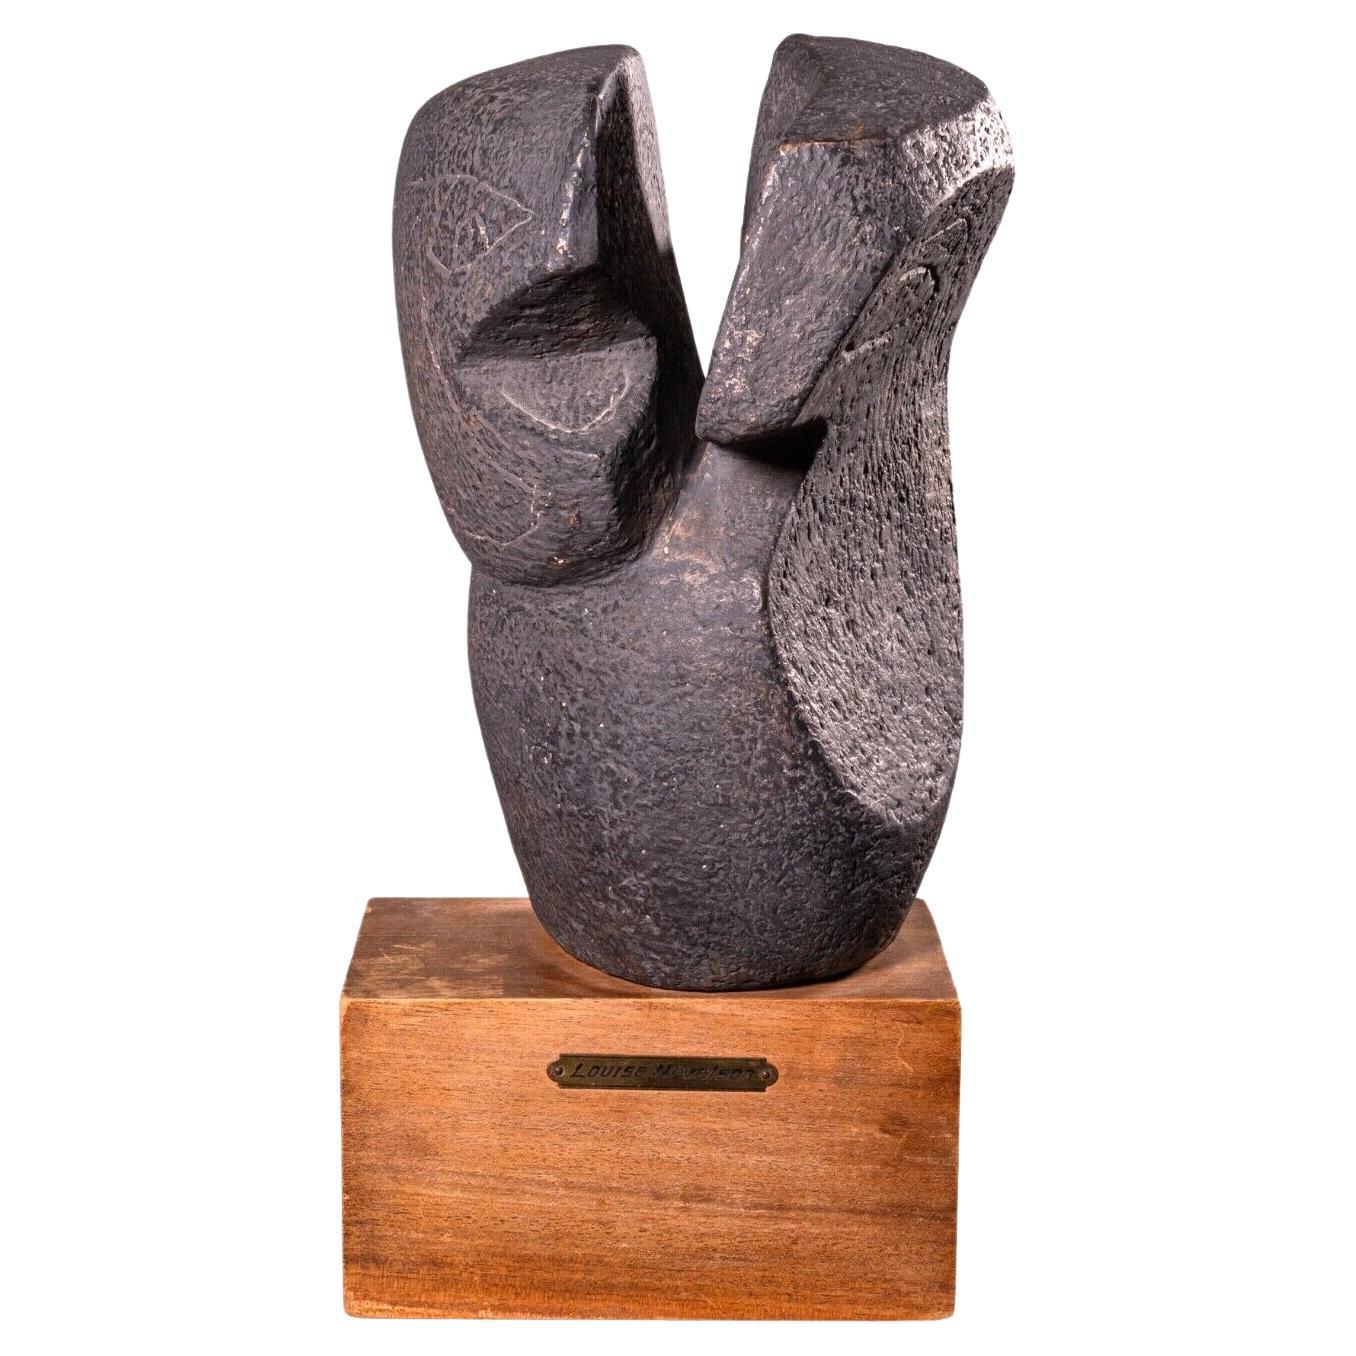 Louise Nevelson Abstract Modern Patinated Bronze Sculpture on Wood Base